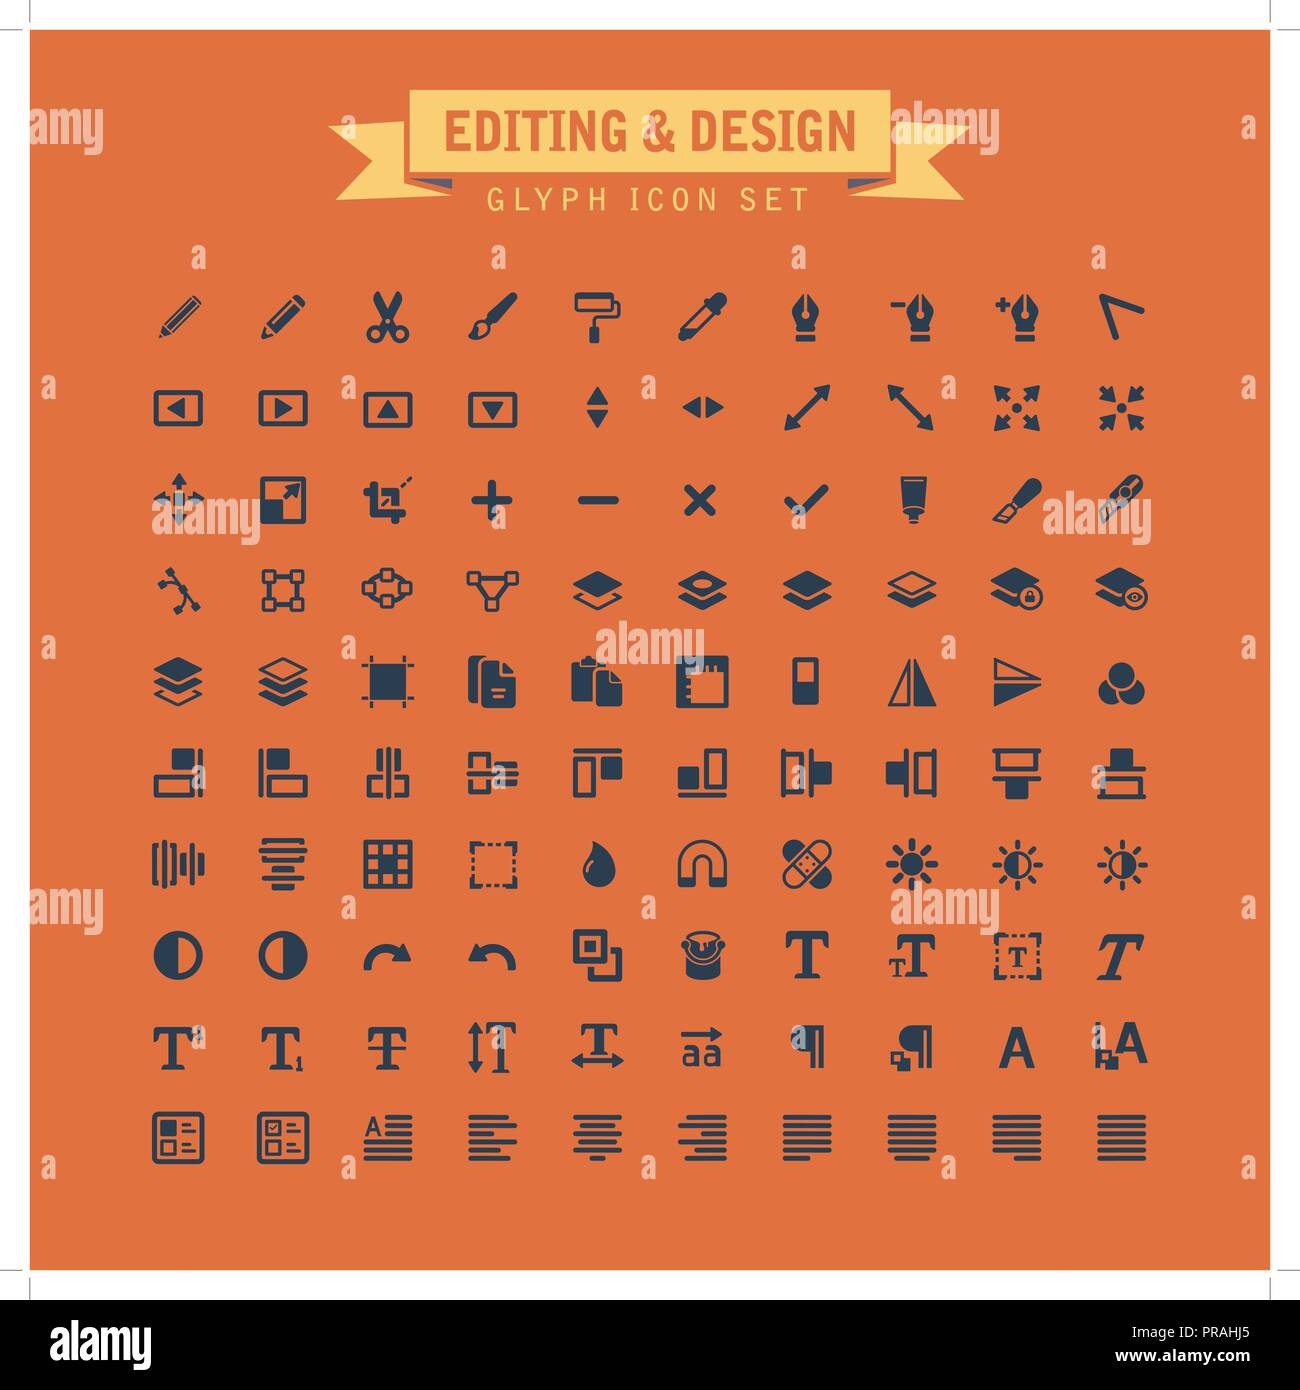 Editing And Design Glyph Icon Set Stock Vector